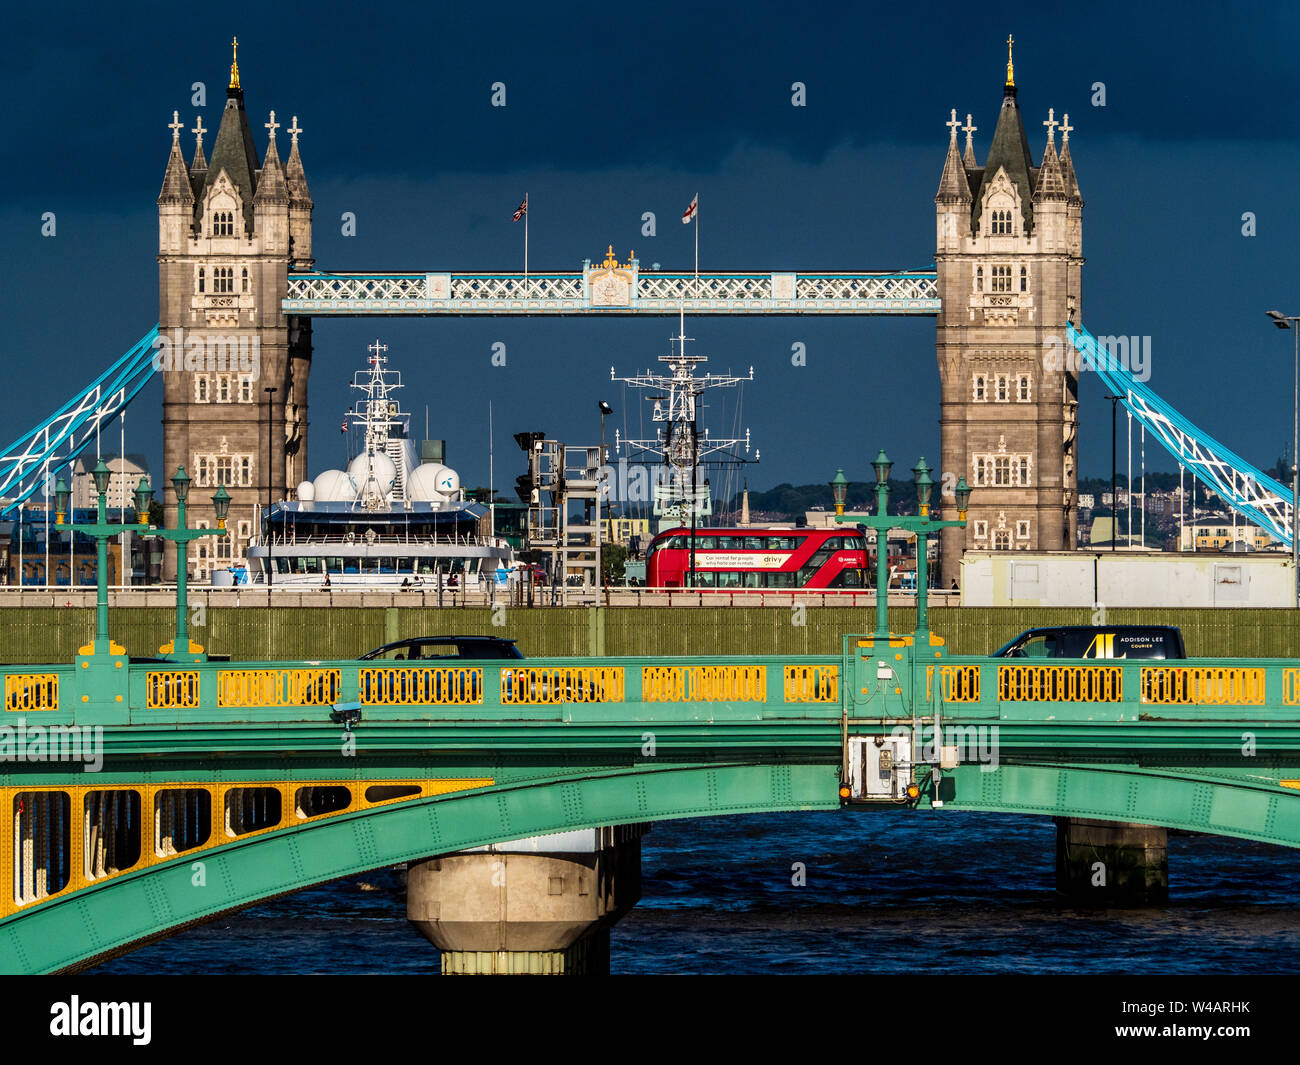 Tower Bridge London under stormy sky. Iconic Tower Bridge against a dark sky with Southwark Bridge and London Bridge traffic visible in the foreground Stock Photo